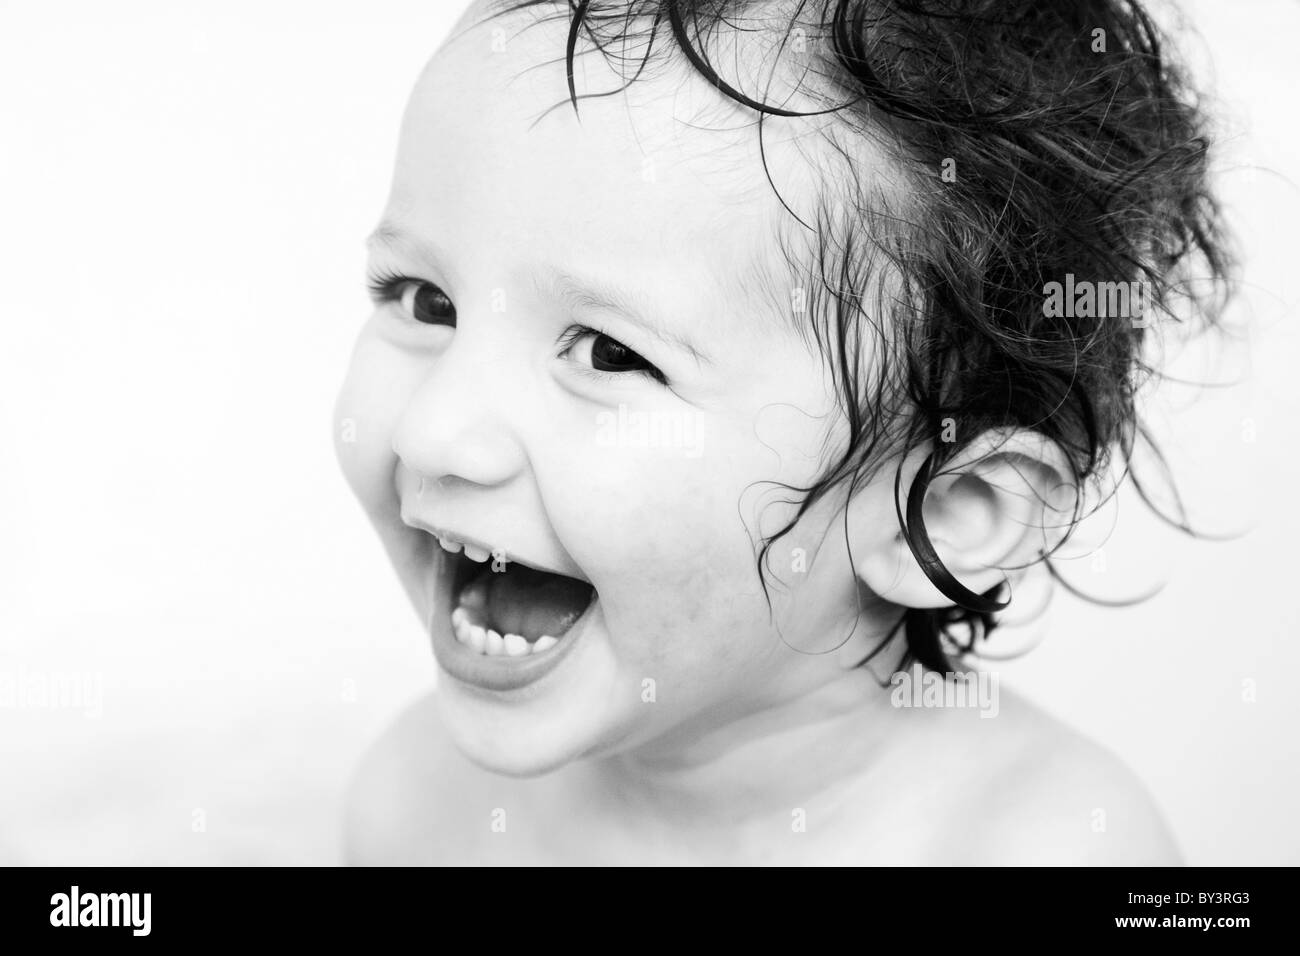 2 year old boy Black and White Stock Photos & Images - Alamy